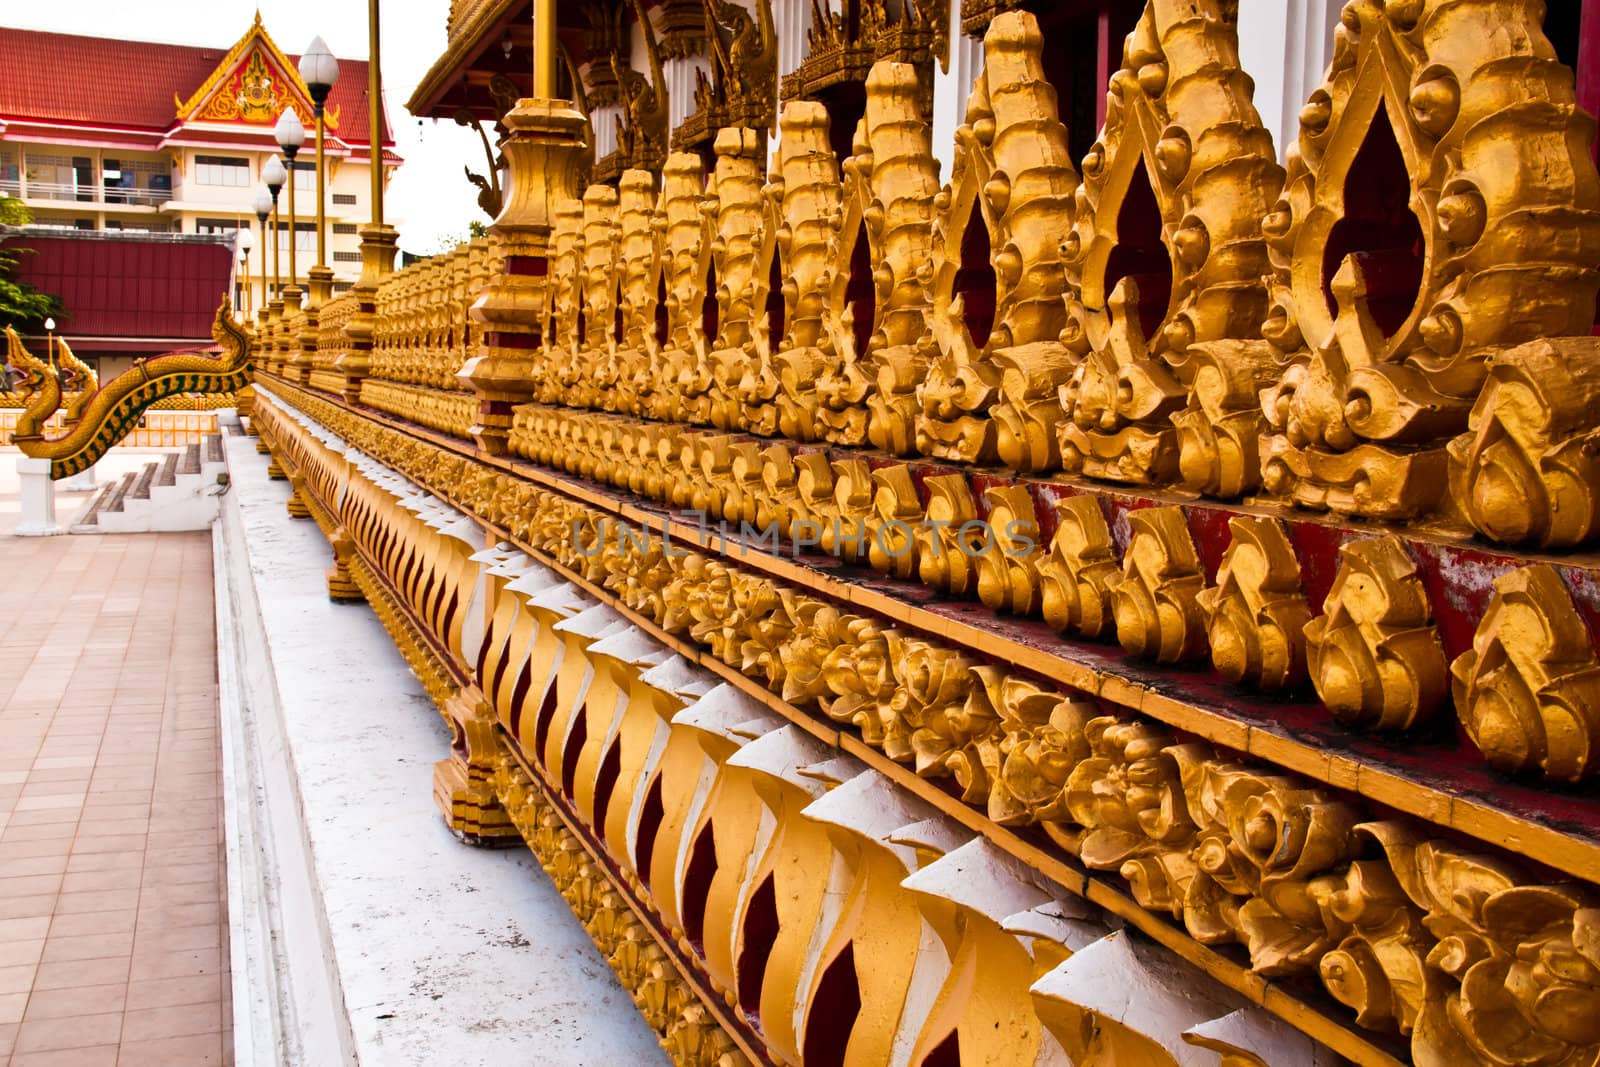 The beauty of the corridors. The Thai temple architecture.